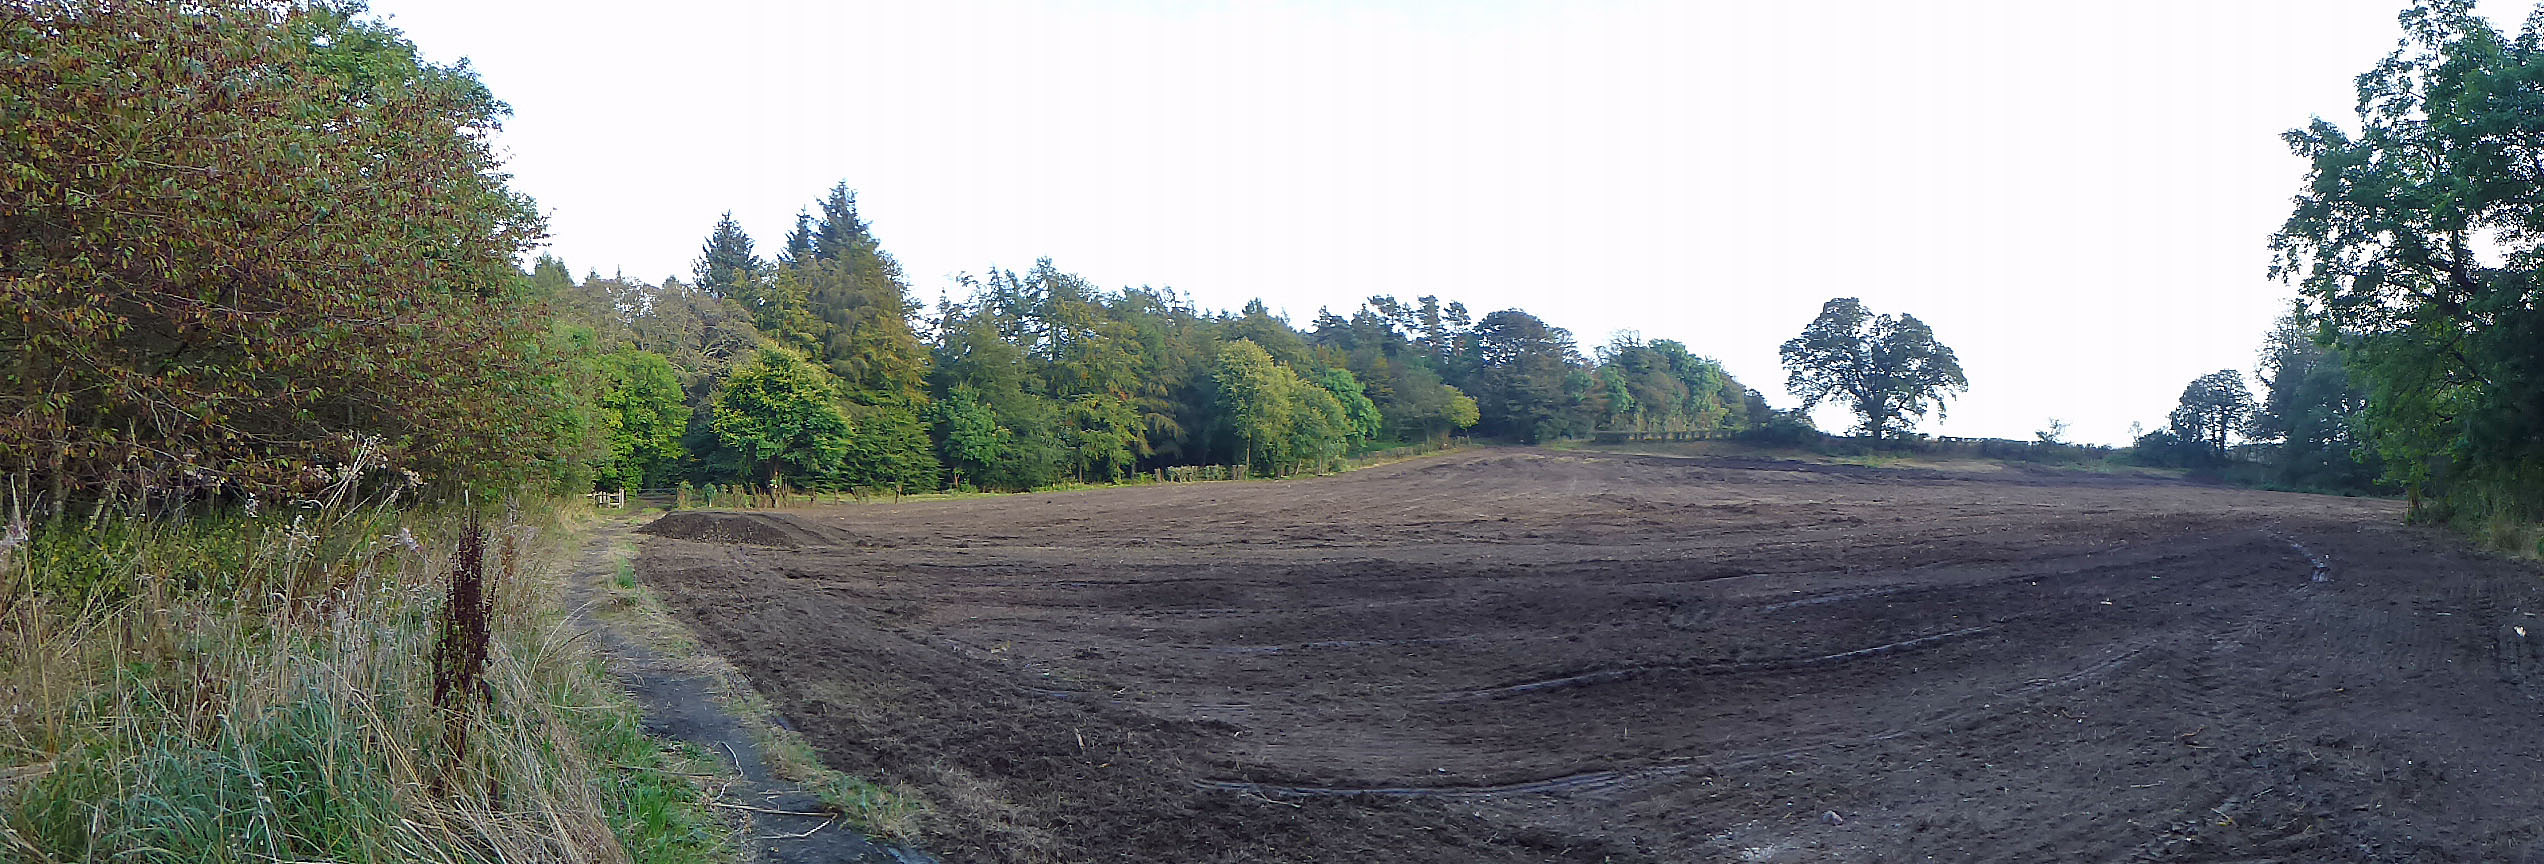 After the groundworks had been completed